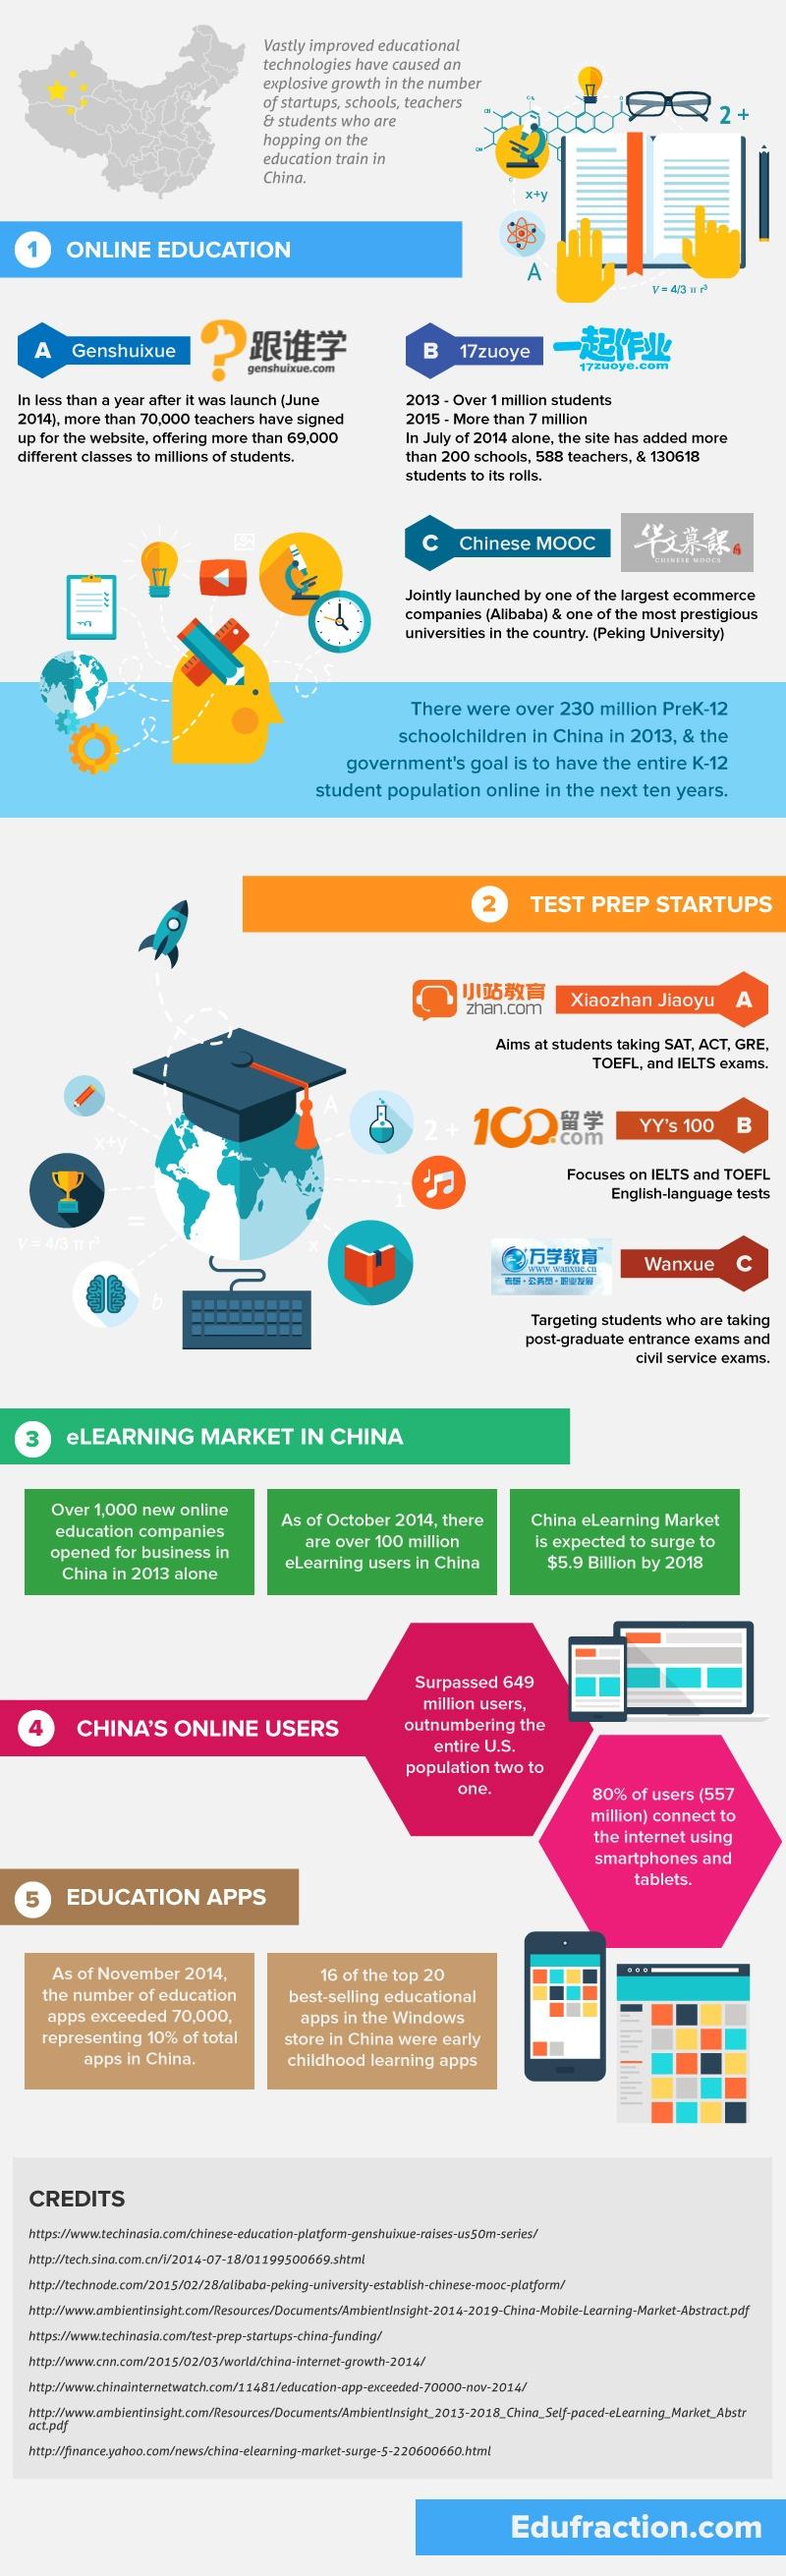 rise-of-educational-technology-in-china-infographic